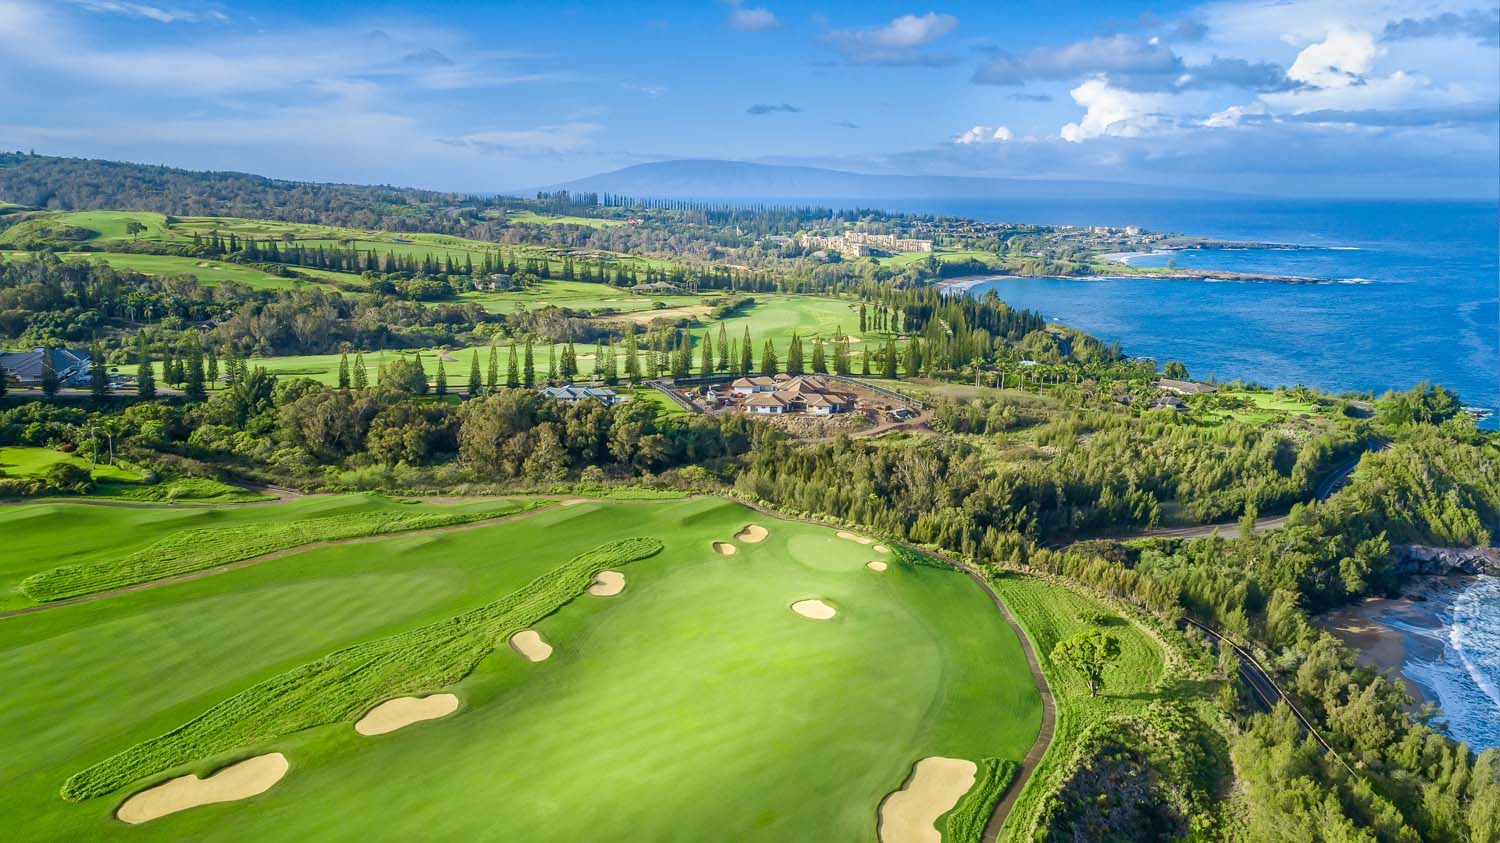 Kapalua Resort Plantation Course GOLF STAY AND PLAYS